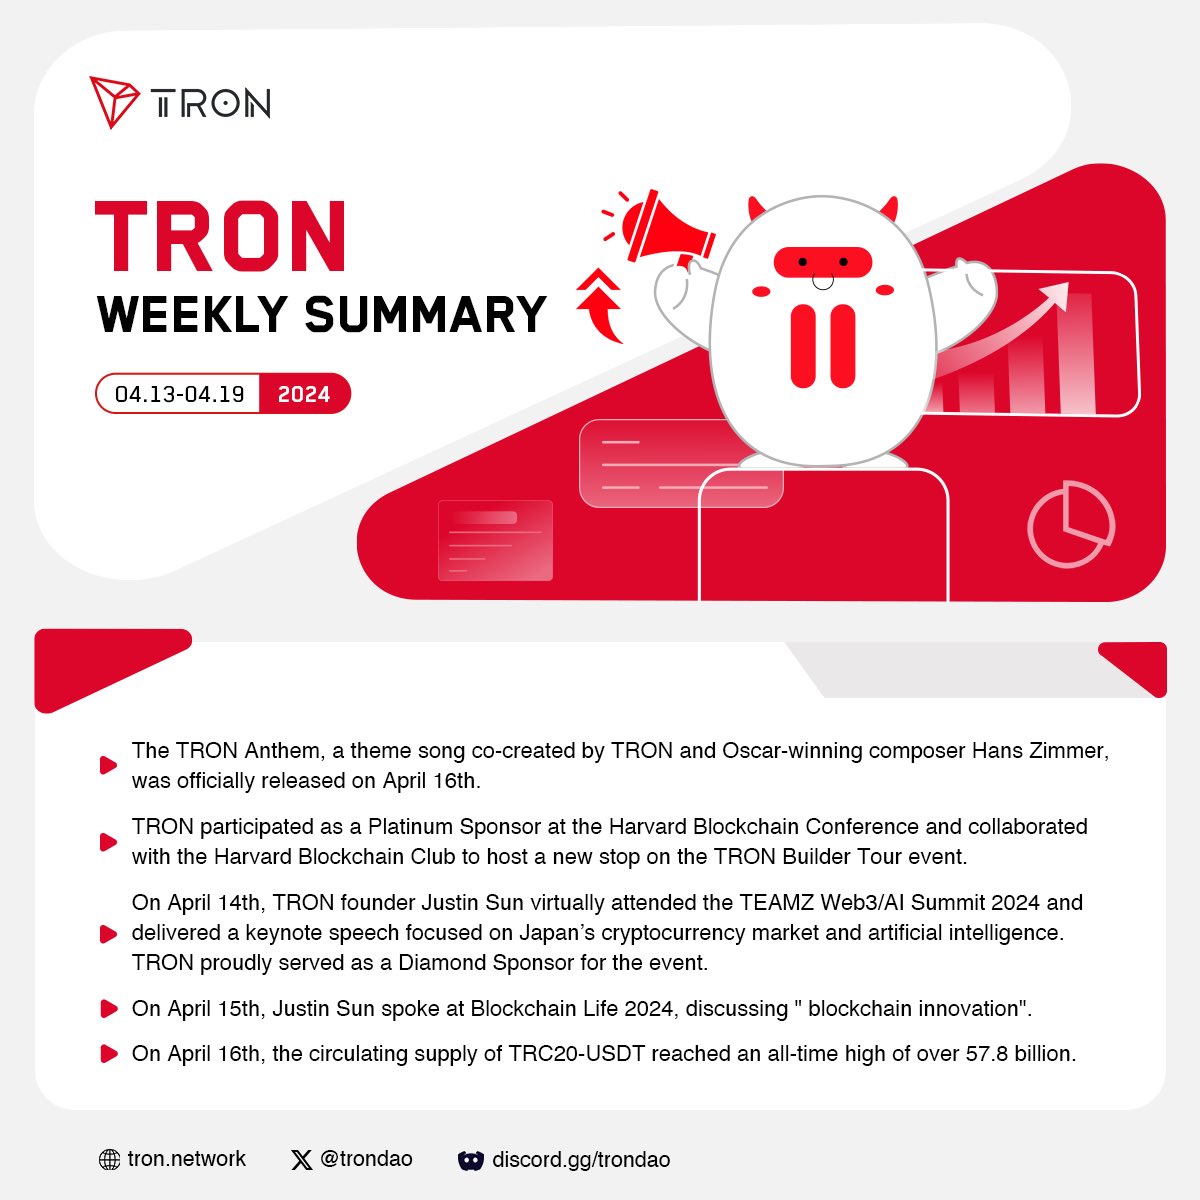 🧐Check out #TRON Highlights from this week (Apr 13, 2024 - Apr 19, 2024). 🙌We'll update you on the main news about #TRON and #TRON #Ecosystem. So stay tuned, #TRONICS!